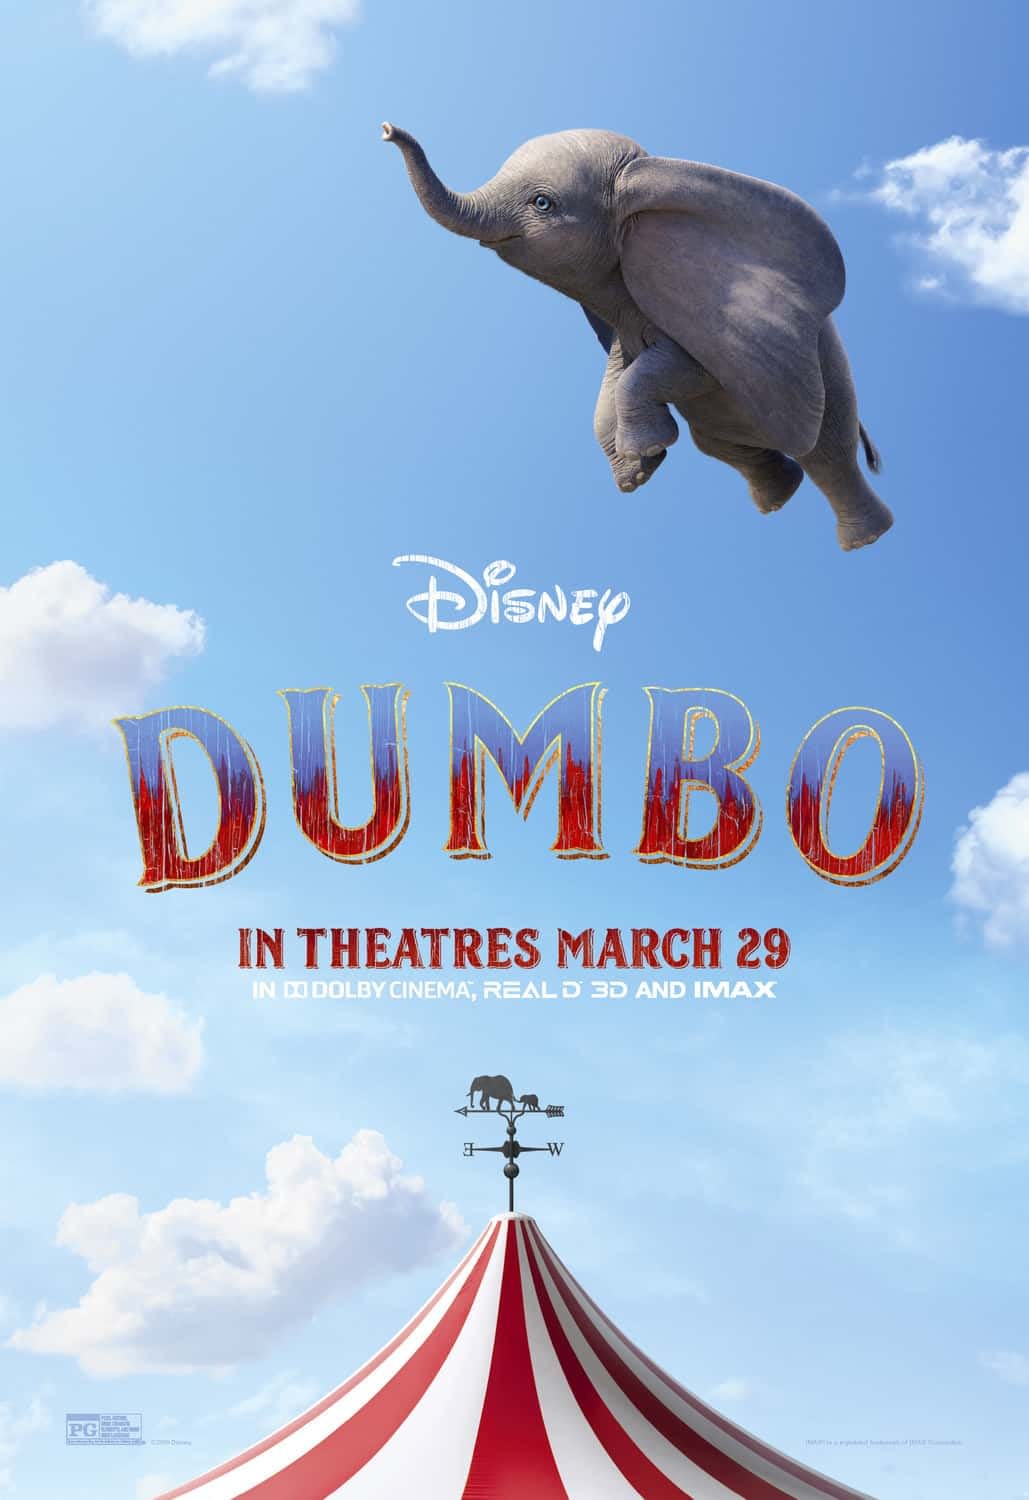 First Reactions to the Live-Action Dumbo Remake Plus 2 More Posters